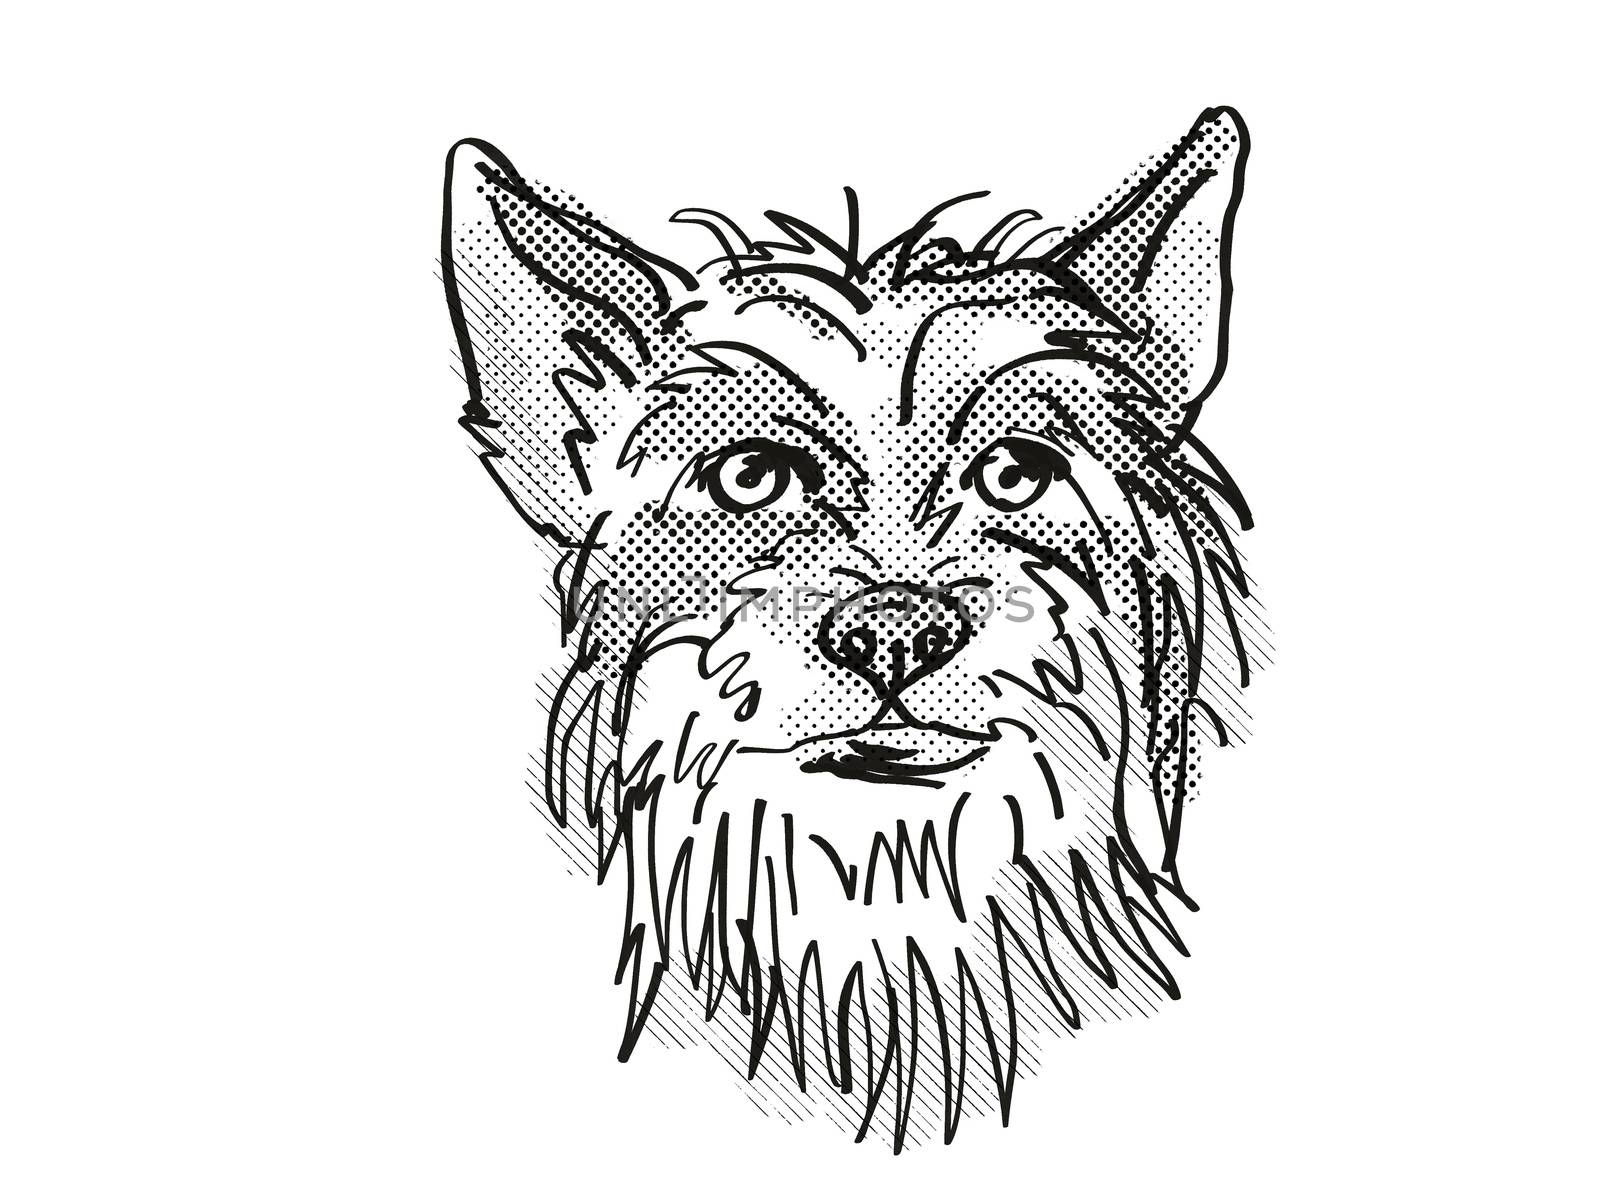 Retro cartoon style drawing of head of a Chinese Crested, a domestic dog or canine breed on isolated white background done in black and white.